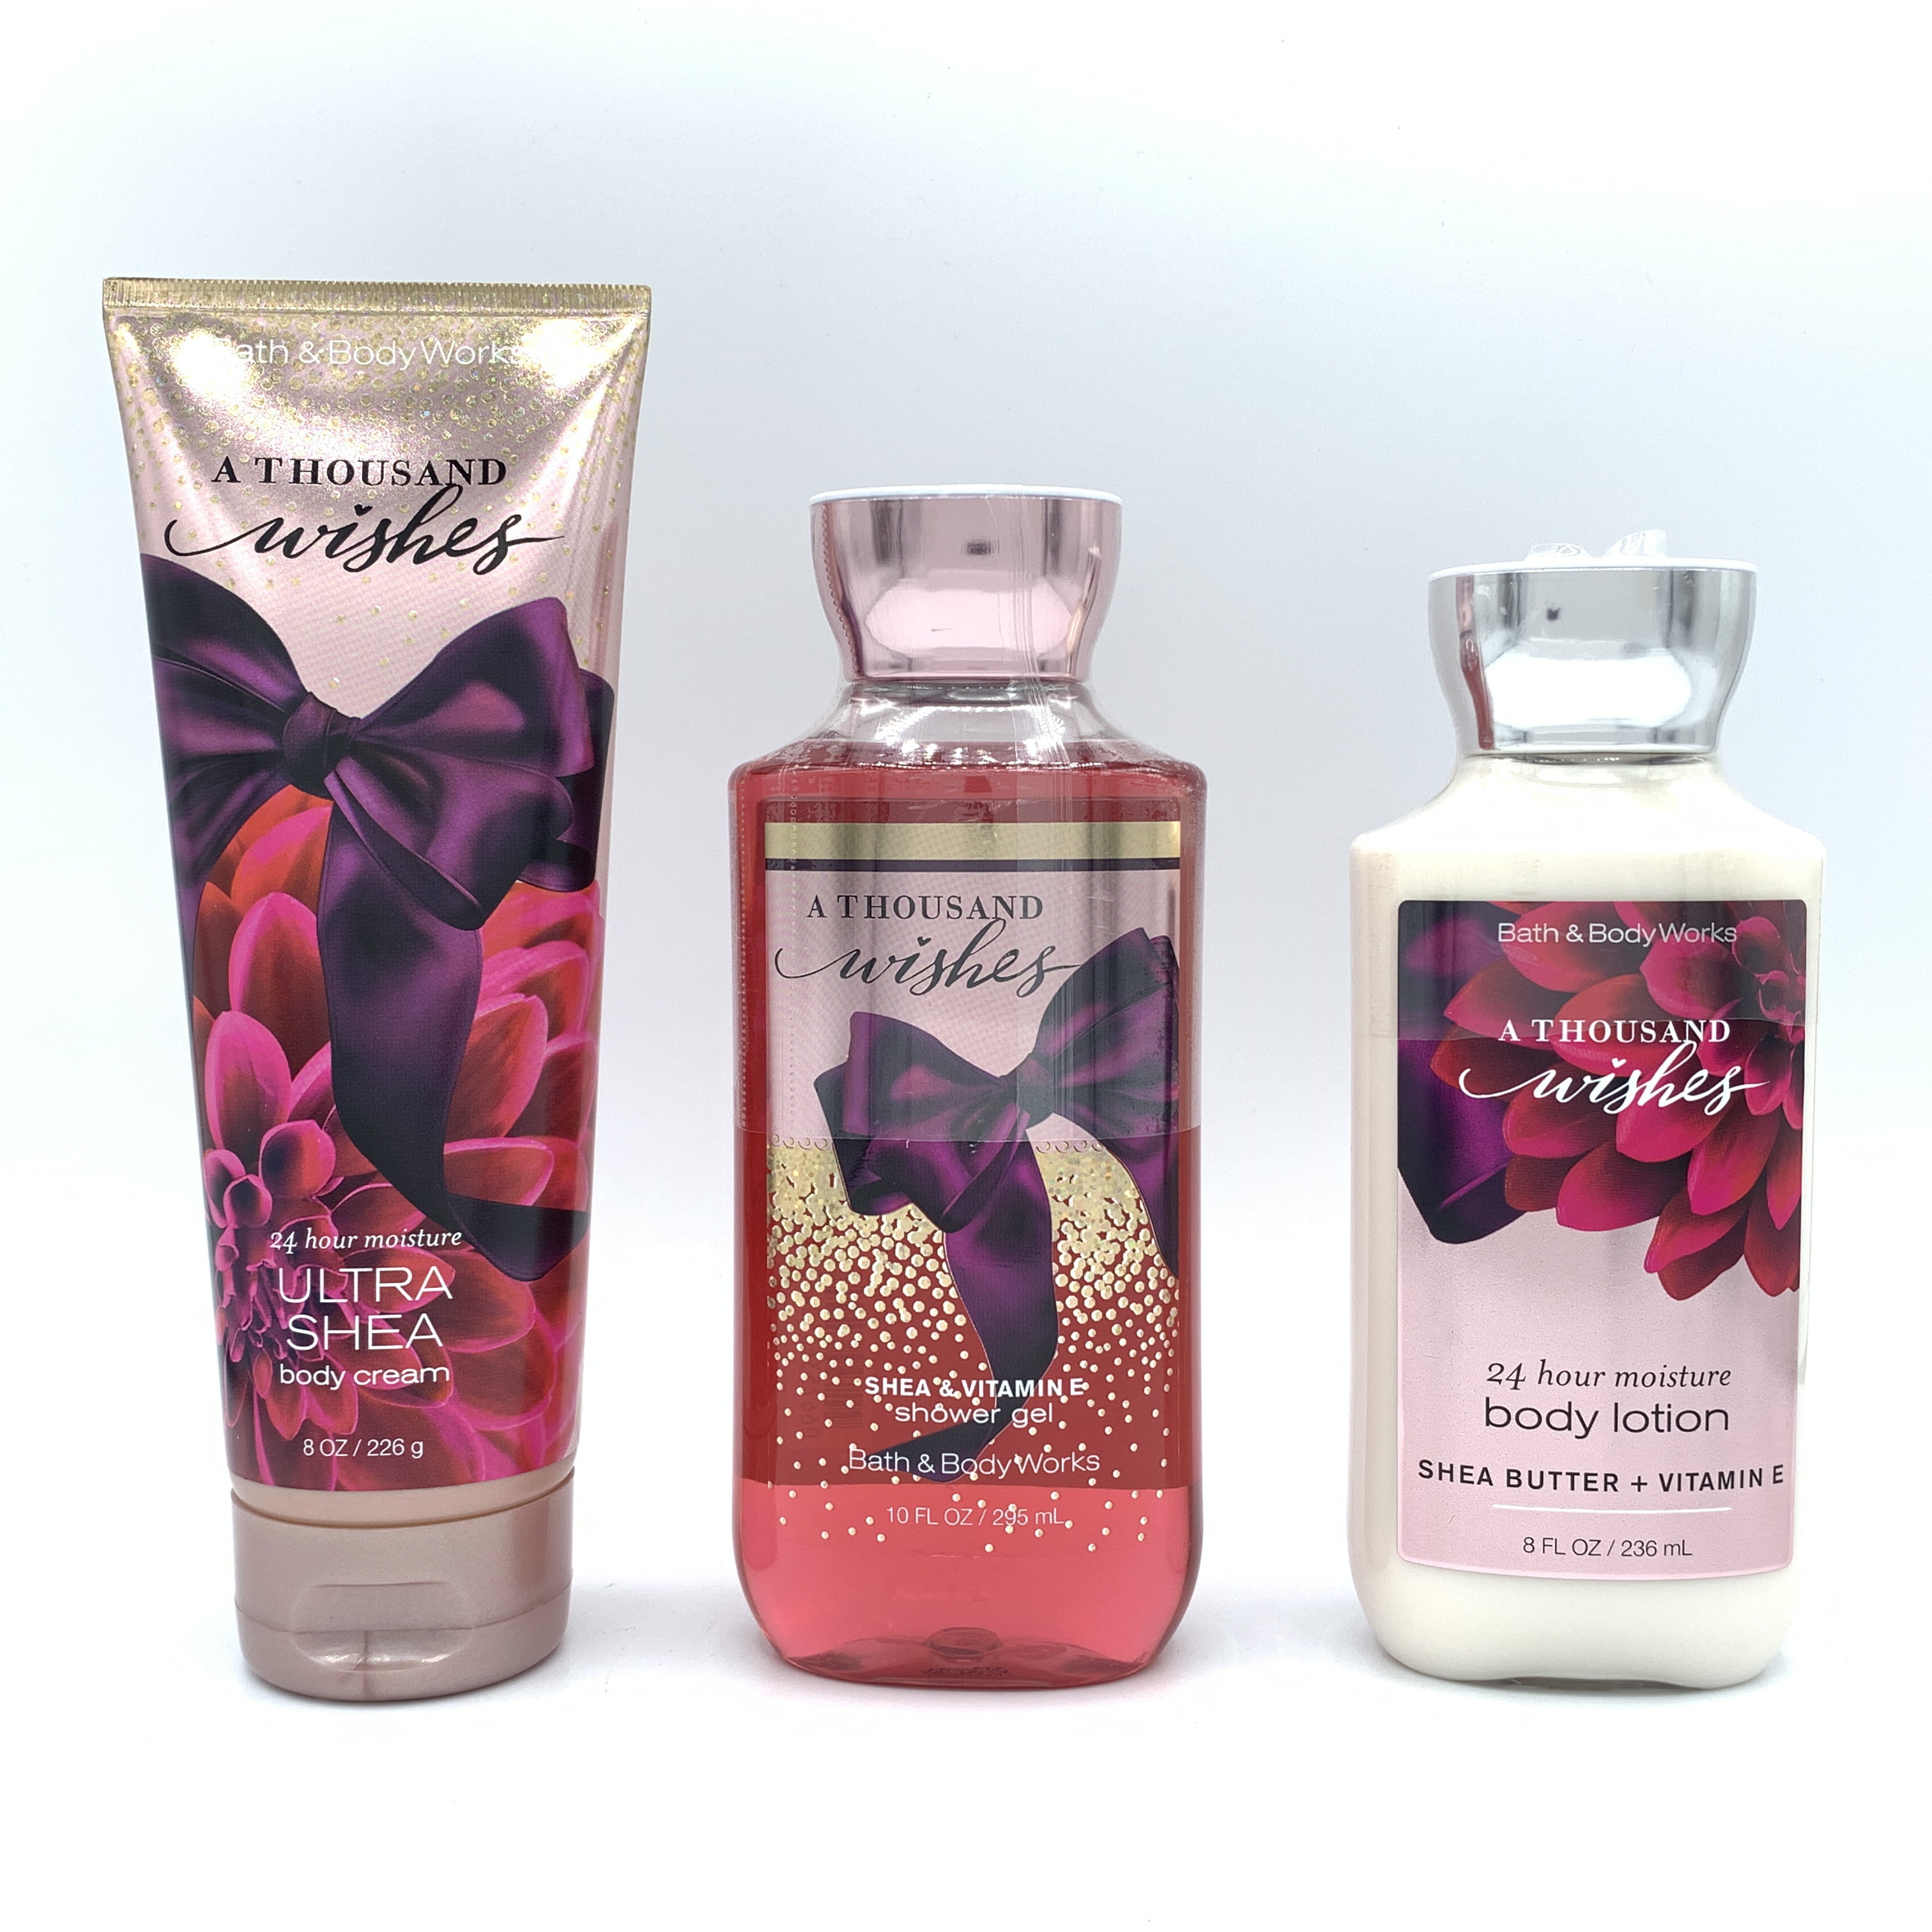 Bath and Body Works A Thousand Wishes Body Cream, Shower Gel and Body